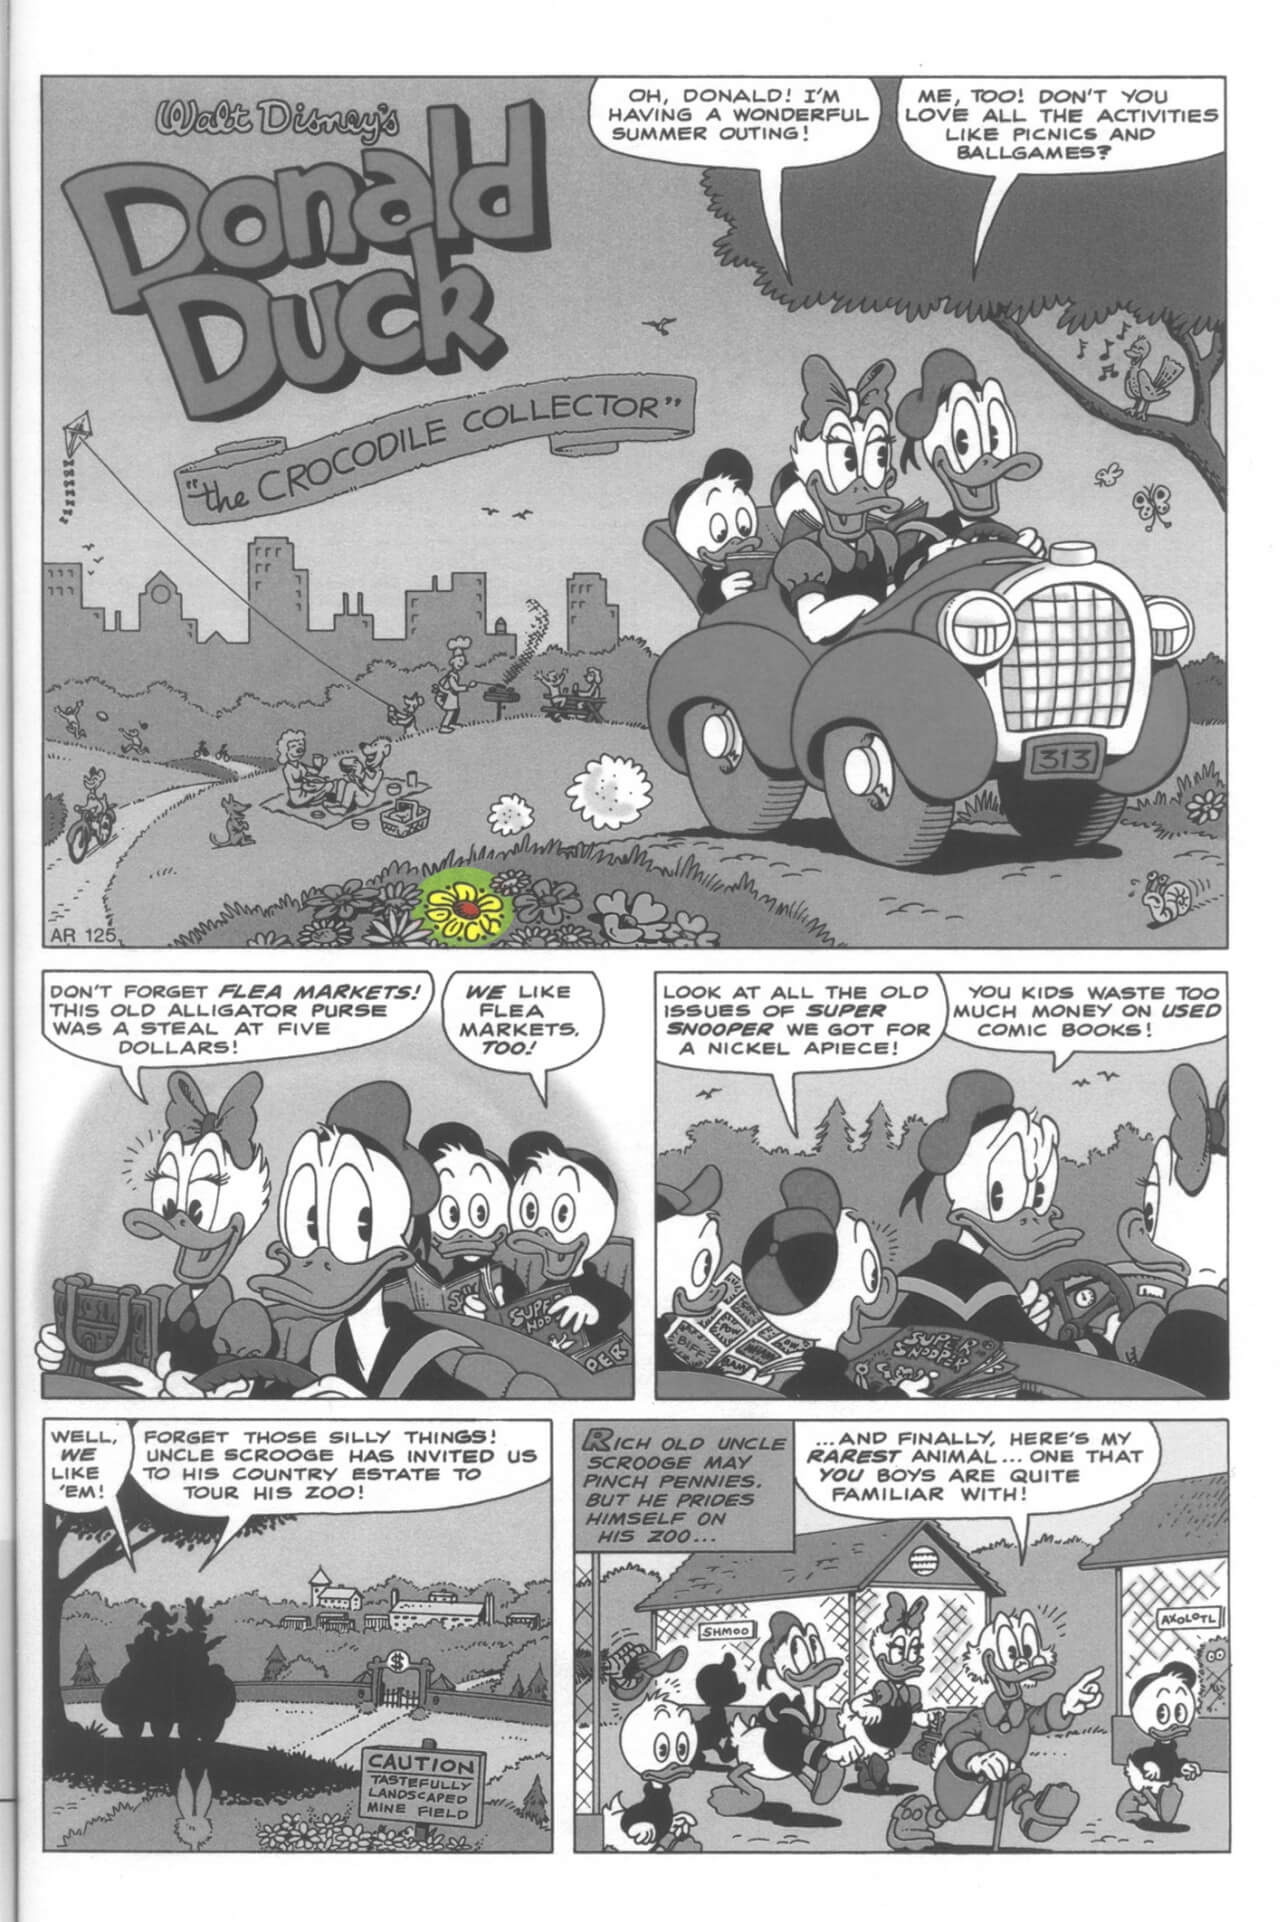 D.U.C.K in The Crocodile Collector first page